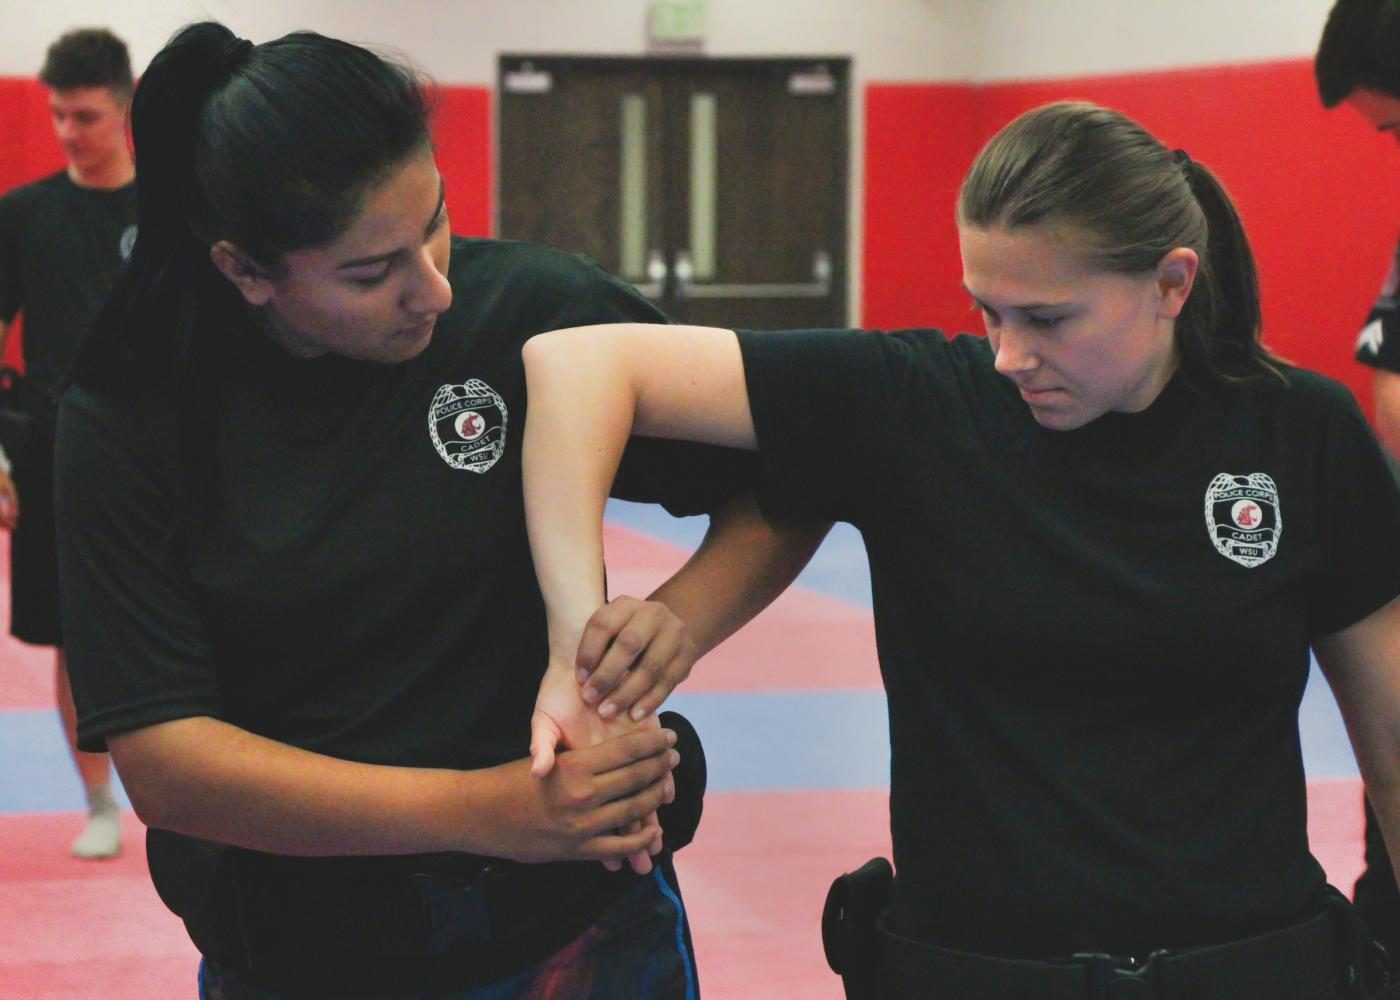 Sopohmore Maria Campos and senior Sammy Bill, both criminal justice majors, practice take downs during Defensive Tactics Training class in the Physical Education building on the morning on Monday, August 28th. 